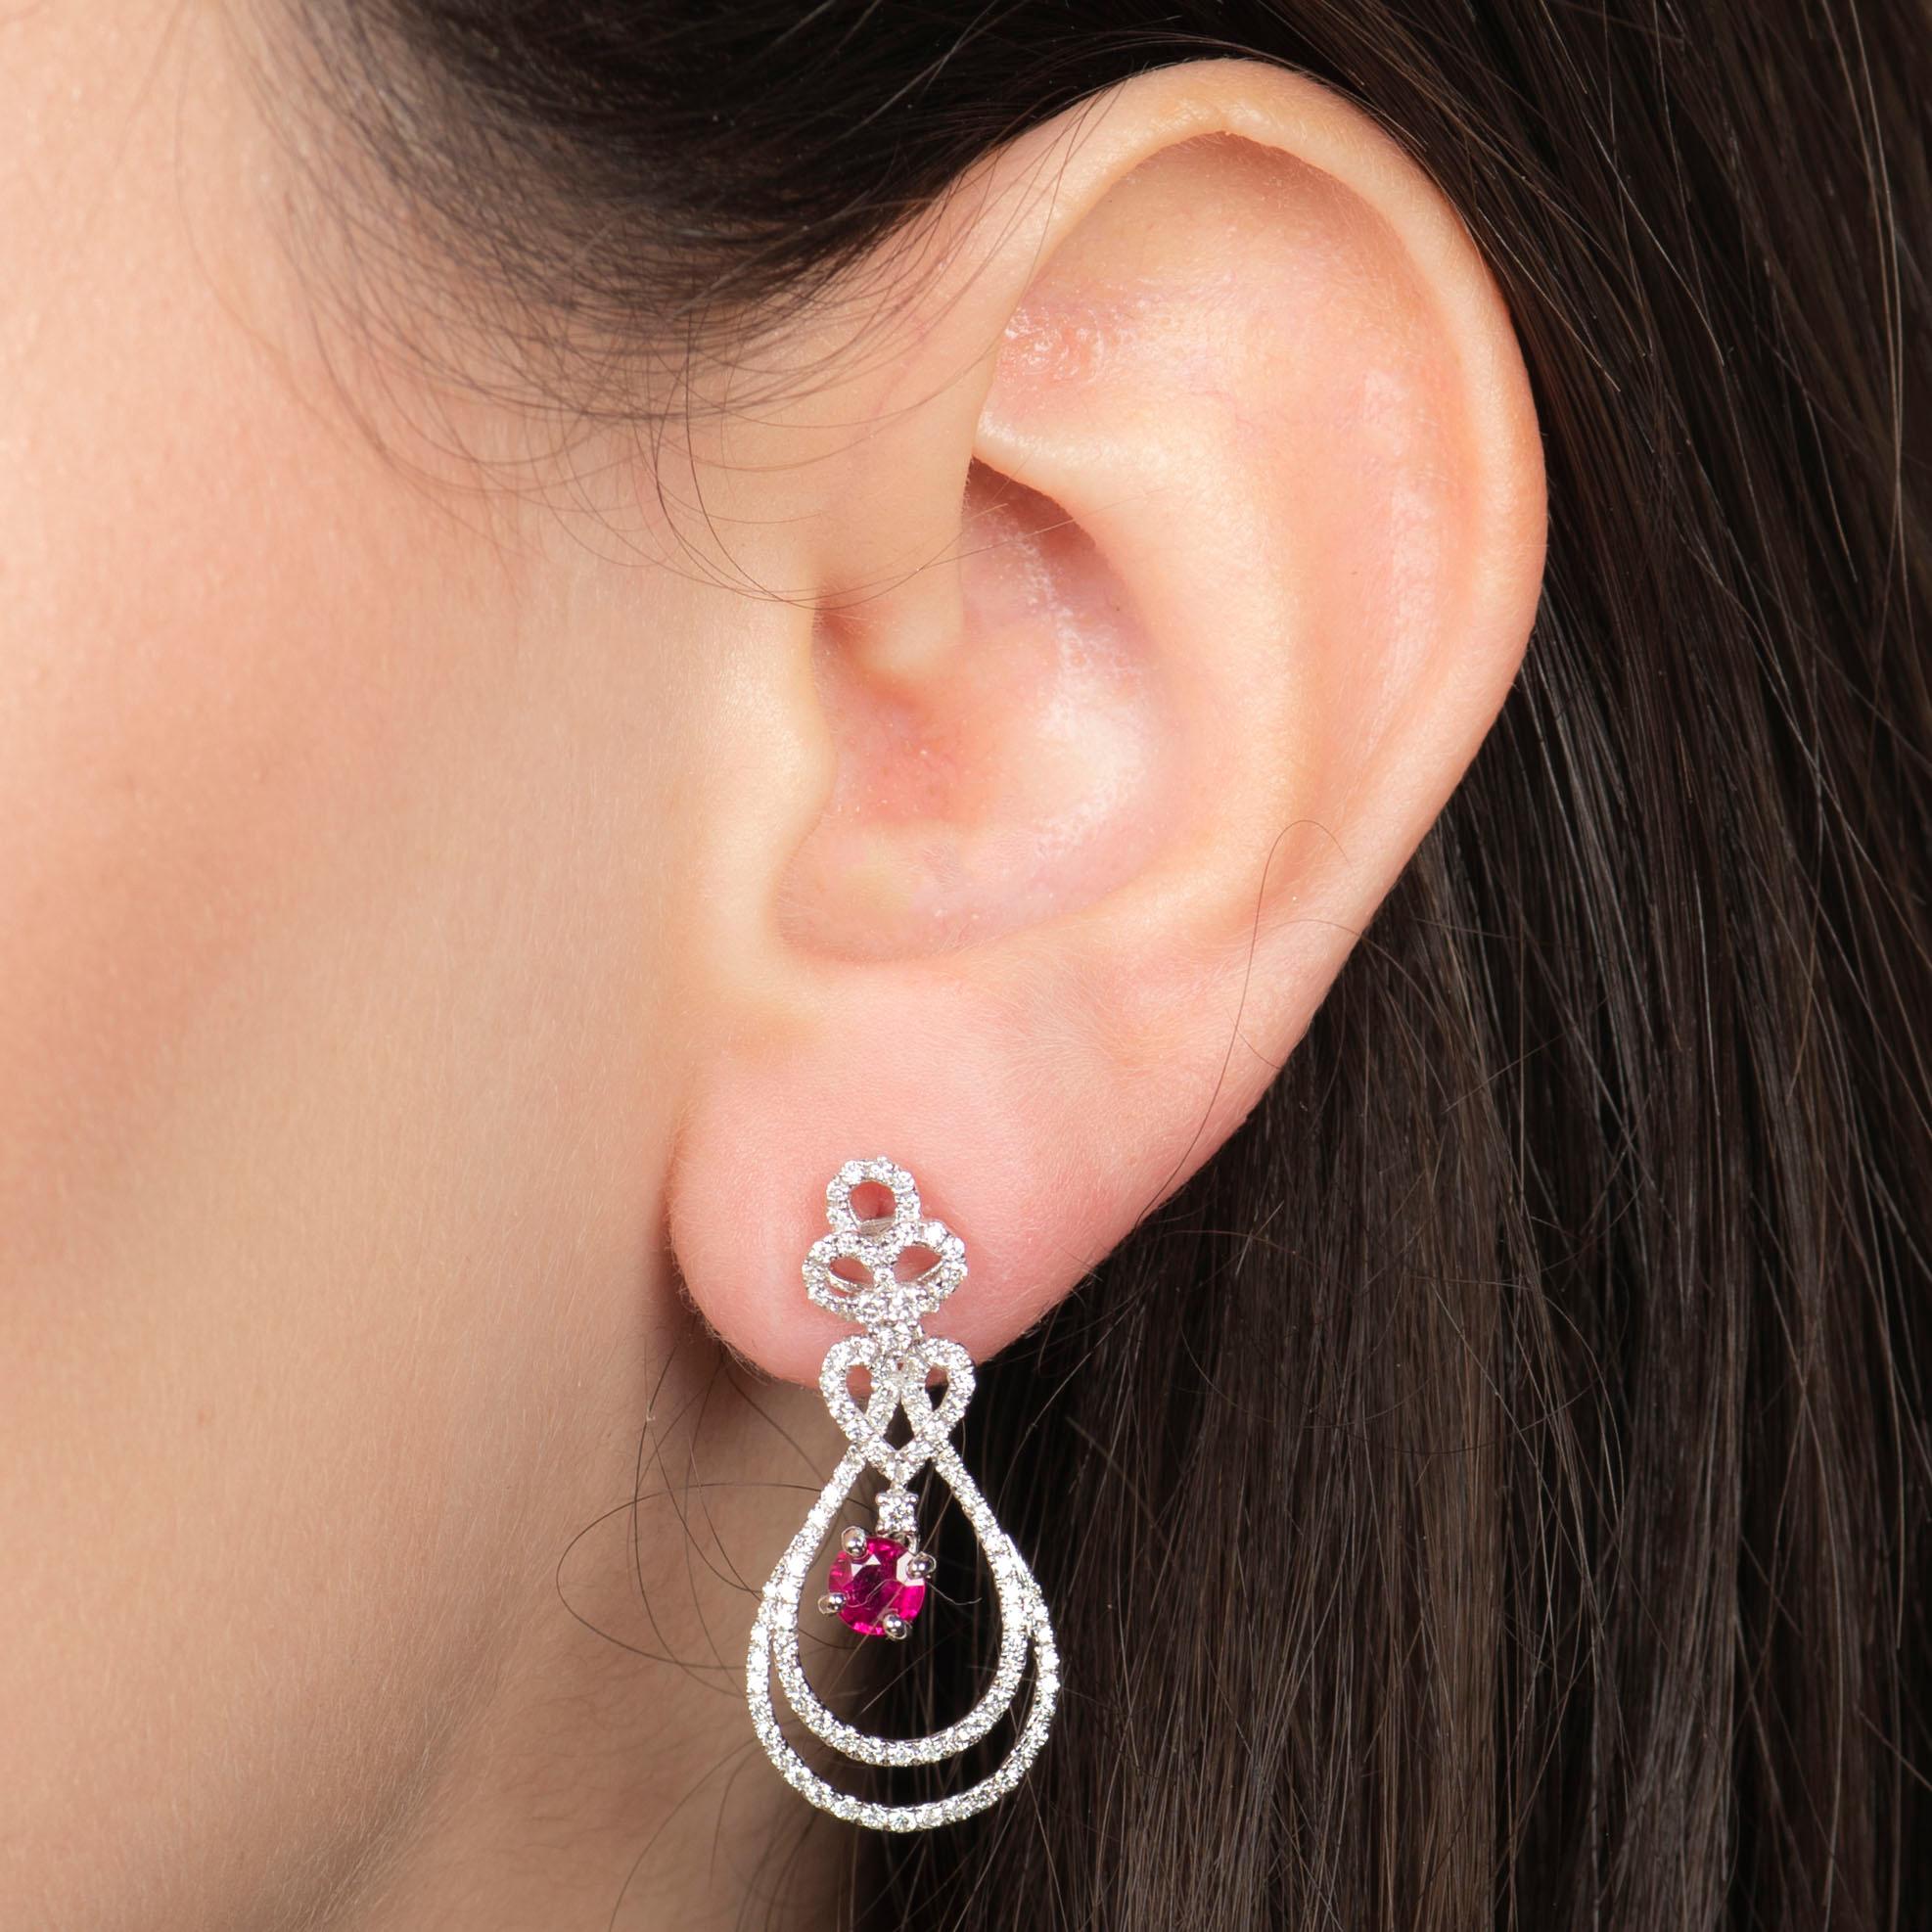 These intricate diamond and ruby dangle earrings have a 0.97ct total weight in natural round brilliant cut diamonds and a 0.74ct total weight in round natural rubies, which have a little pink-ish hue. The stones are encased in 18kt white gold. These